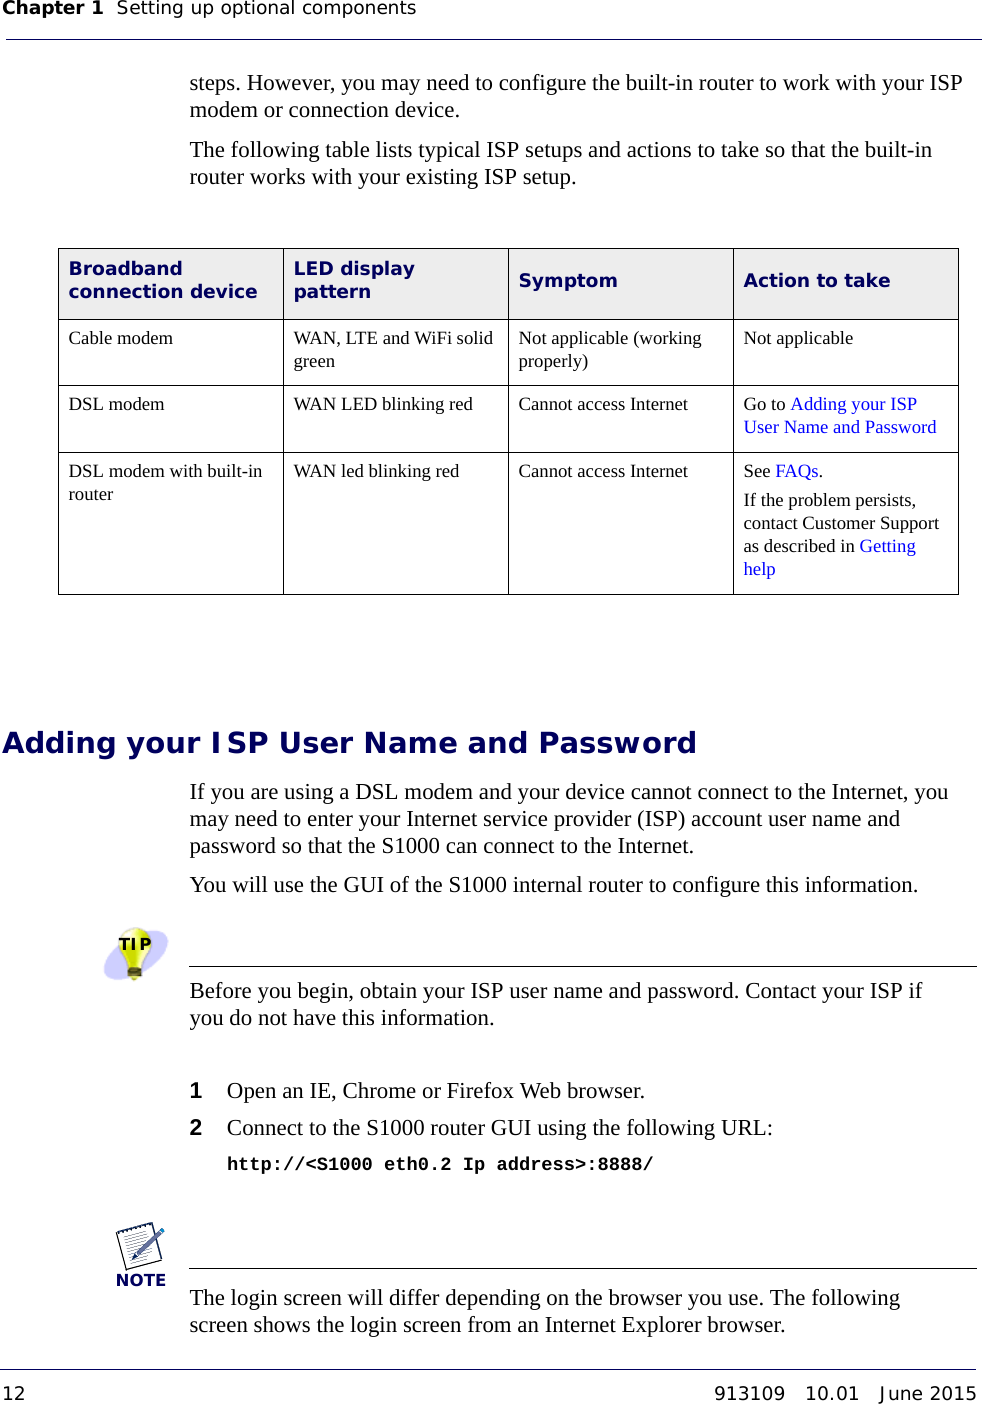 Chapter 1   Setting up optional components 12 913109   10.01   June 2015DRAFTsteps. However, you may need to configure the built-in router to work with your ISP modem or connection device.The following table lists typical ISP setups and actions to take so that the built-in router works with your existing ISP setup.Broadband connection device LED display pattern Symptom Action to takeCable modem WAN, LTE and WiFi solid green Not applicable (working properly) Not applicableDSL modem WAN LED blinking red Cannot access Internet Go to Adding your ISP User Name and PasswordDSL modem with built-in router WAN led blinking red Cannot access Internet See FAQs.If the problem persists, contact Customer Support as described in Getting helpAdding your ISP User Name and PasswordIf you are using a DSL modem and your device cannot connect to the Internet, you may need to enter your Internet service provider (ISP) account user name and password so that the S1000 can connect to the Internet. You will use the GUI of the S1000 internal router to configure this information.TIPBefore you begin, obtain your ISP user name and password. Contact your ISP if you do not have this information.1Open an IE, Chrome or Firefox Web browser.2Connect to the S1000 router GUI using the following URL:http://&lt;S1000 eth0.2 Ip address&gt;:8888/NOTEThe login screen will differ depending on the browser you use. The following screen shows the login screen from an Internet Explorer browser.